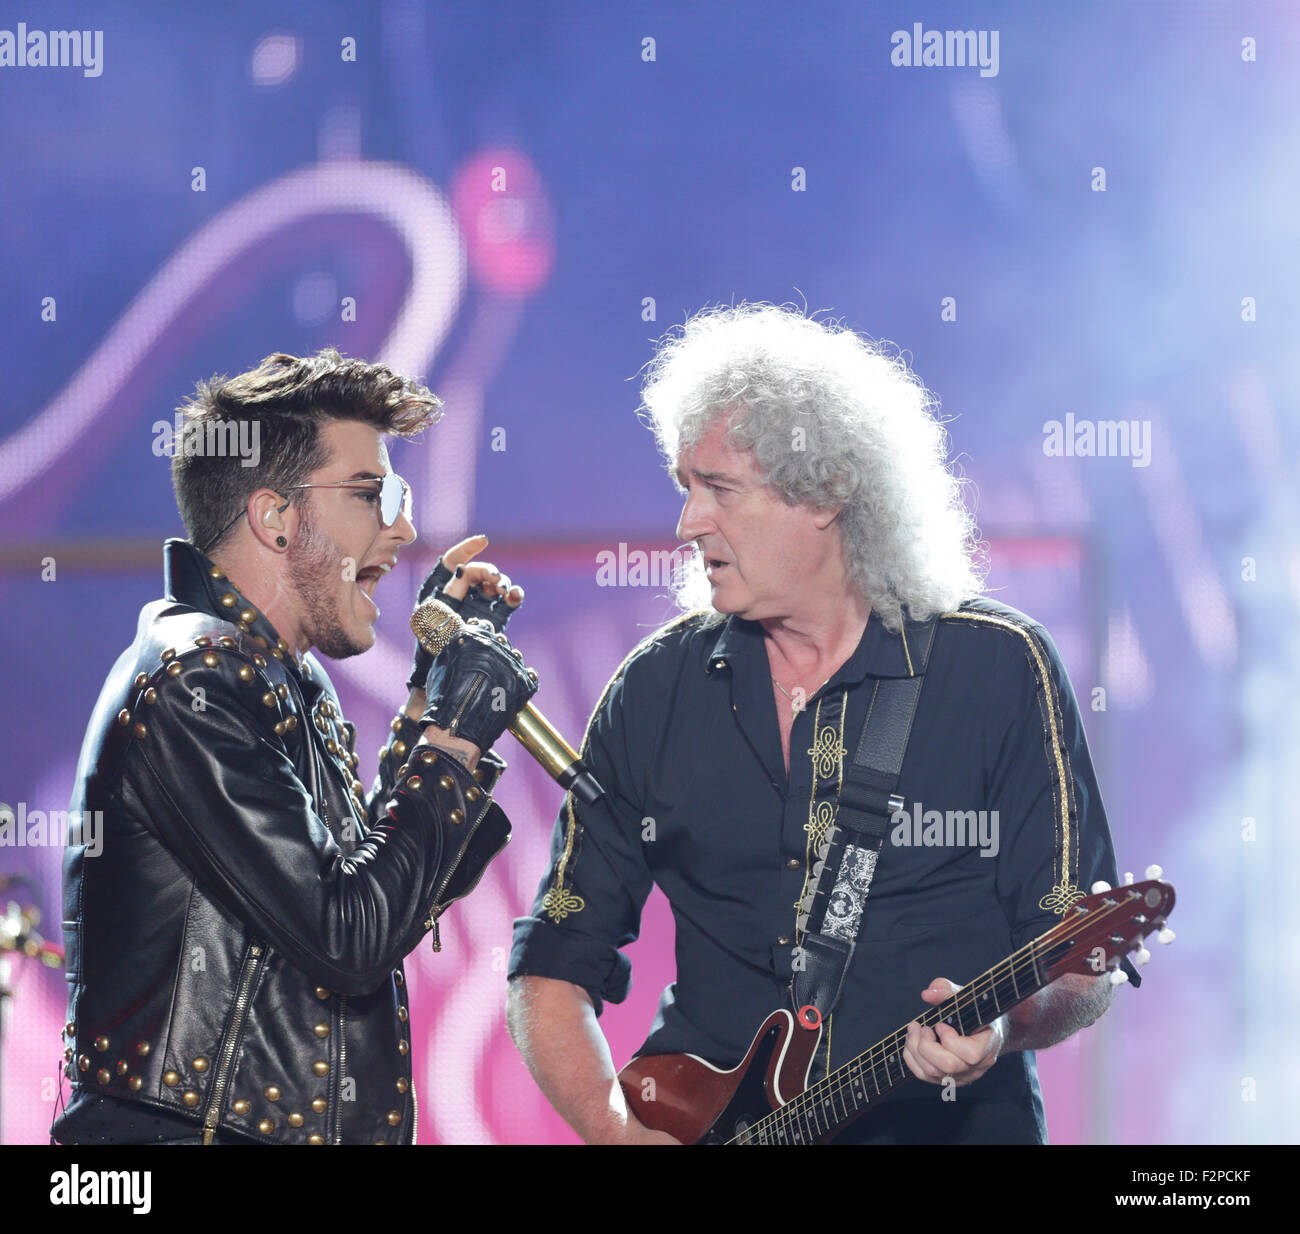 Rio de Janeiro, September, 20th,2015- Rock band Queen performs during the  Rock in Rio concert. Brian May (L) and Adam Lambert. P Stock Photo - Alamy